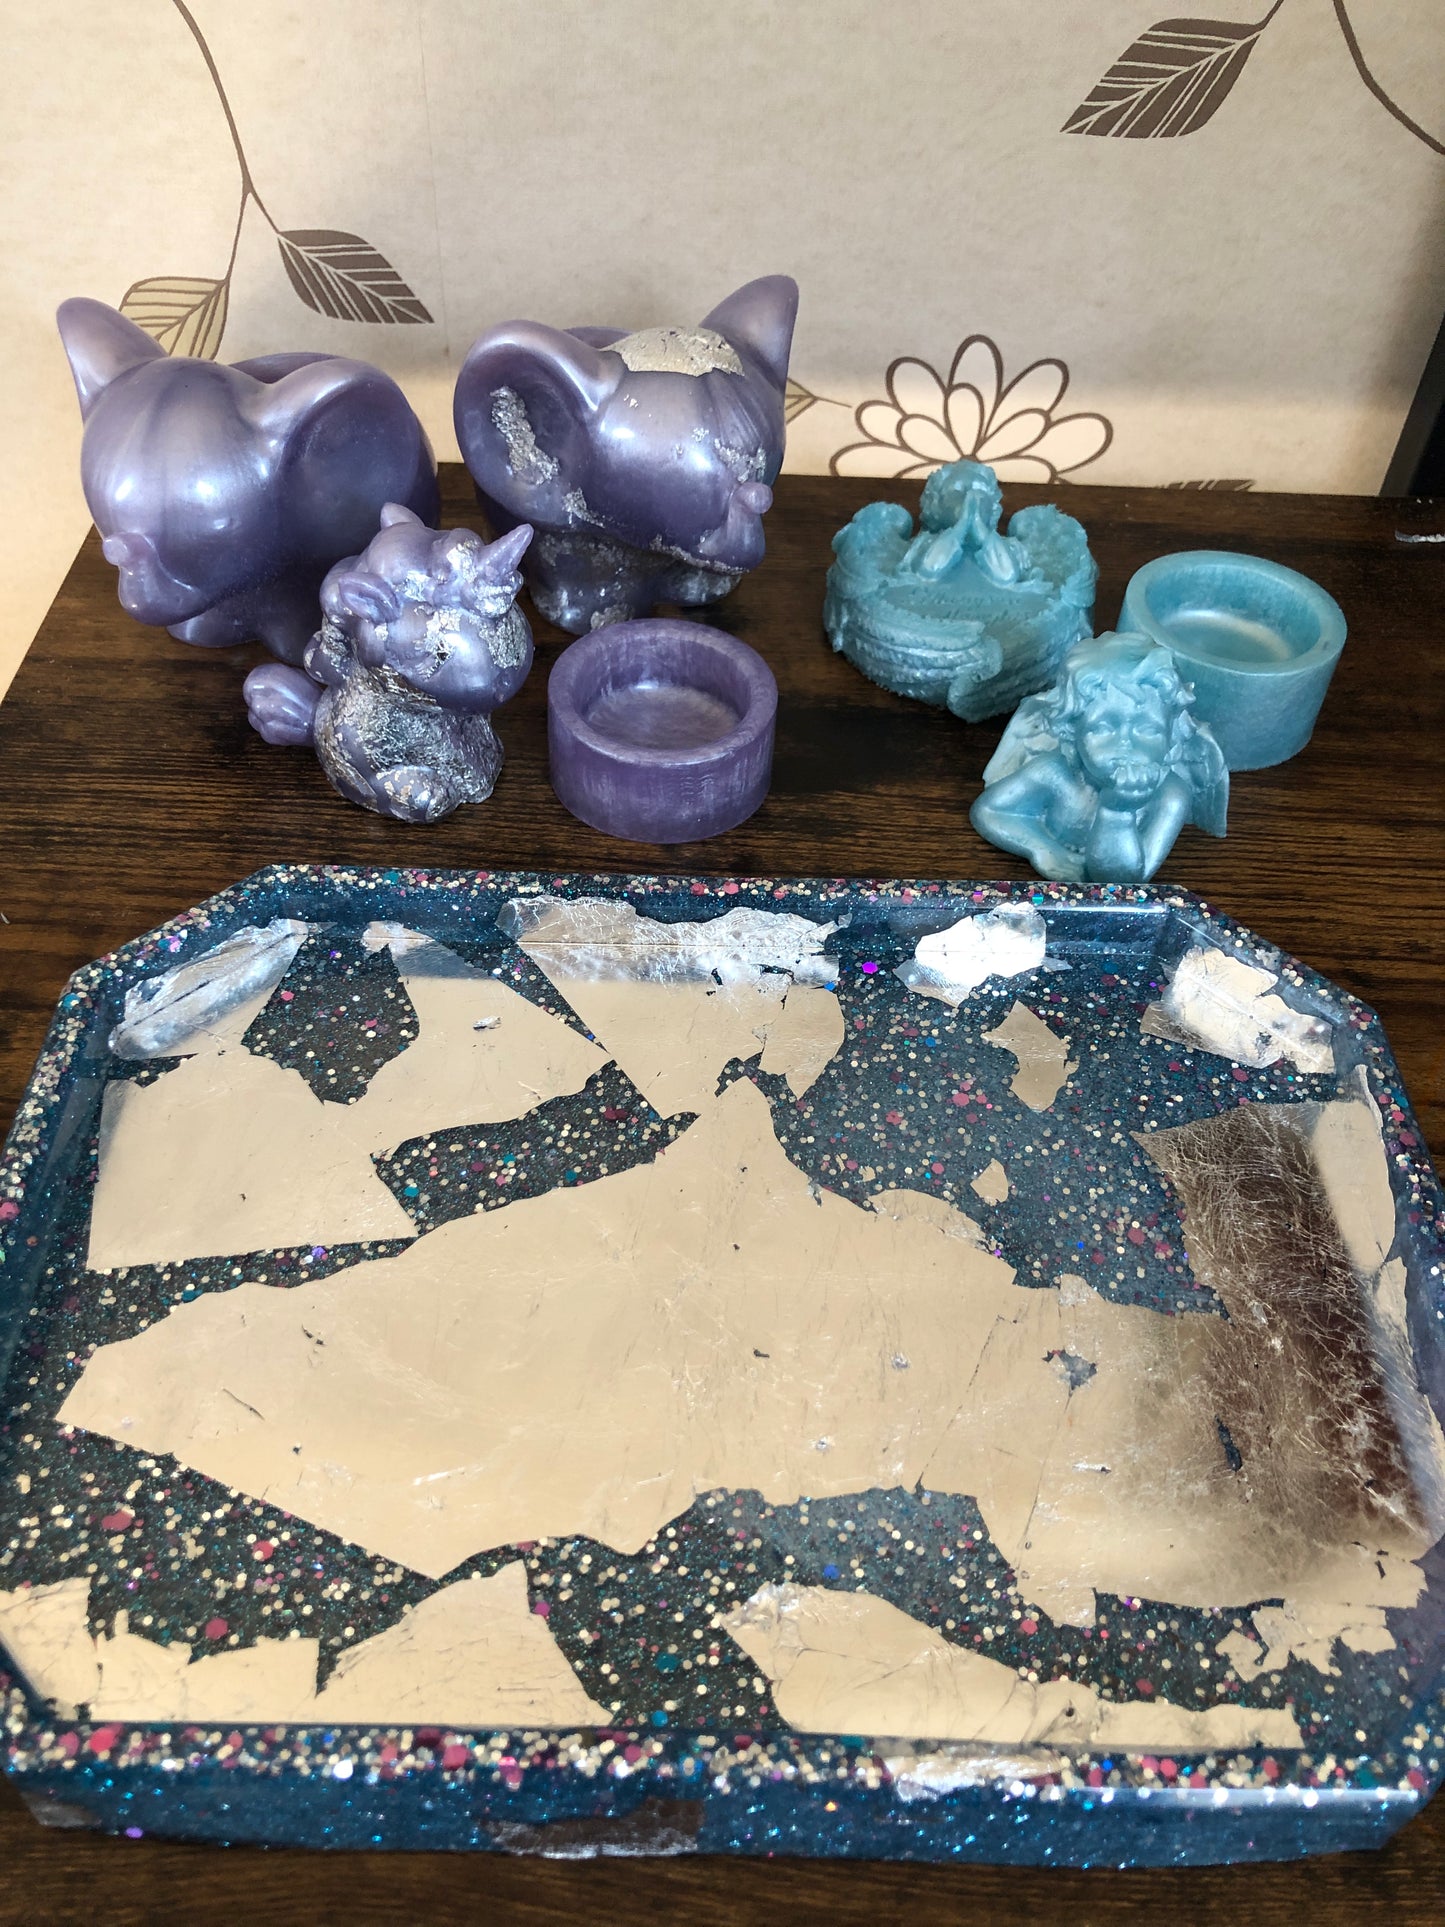 Latest Video Items - Lavenders & Ice Blues